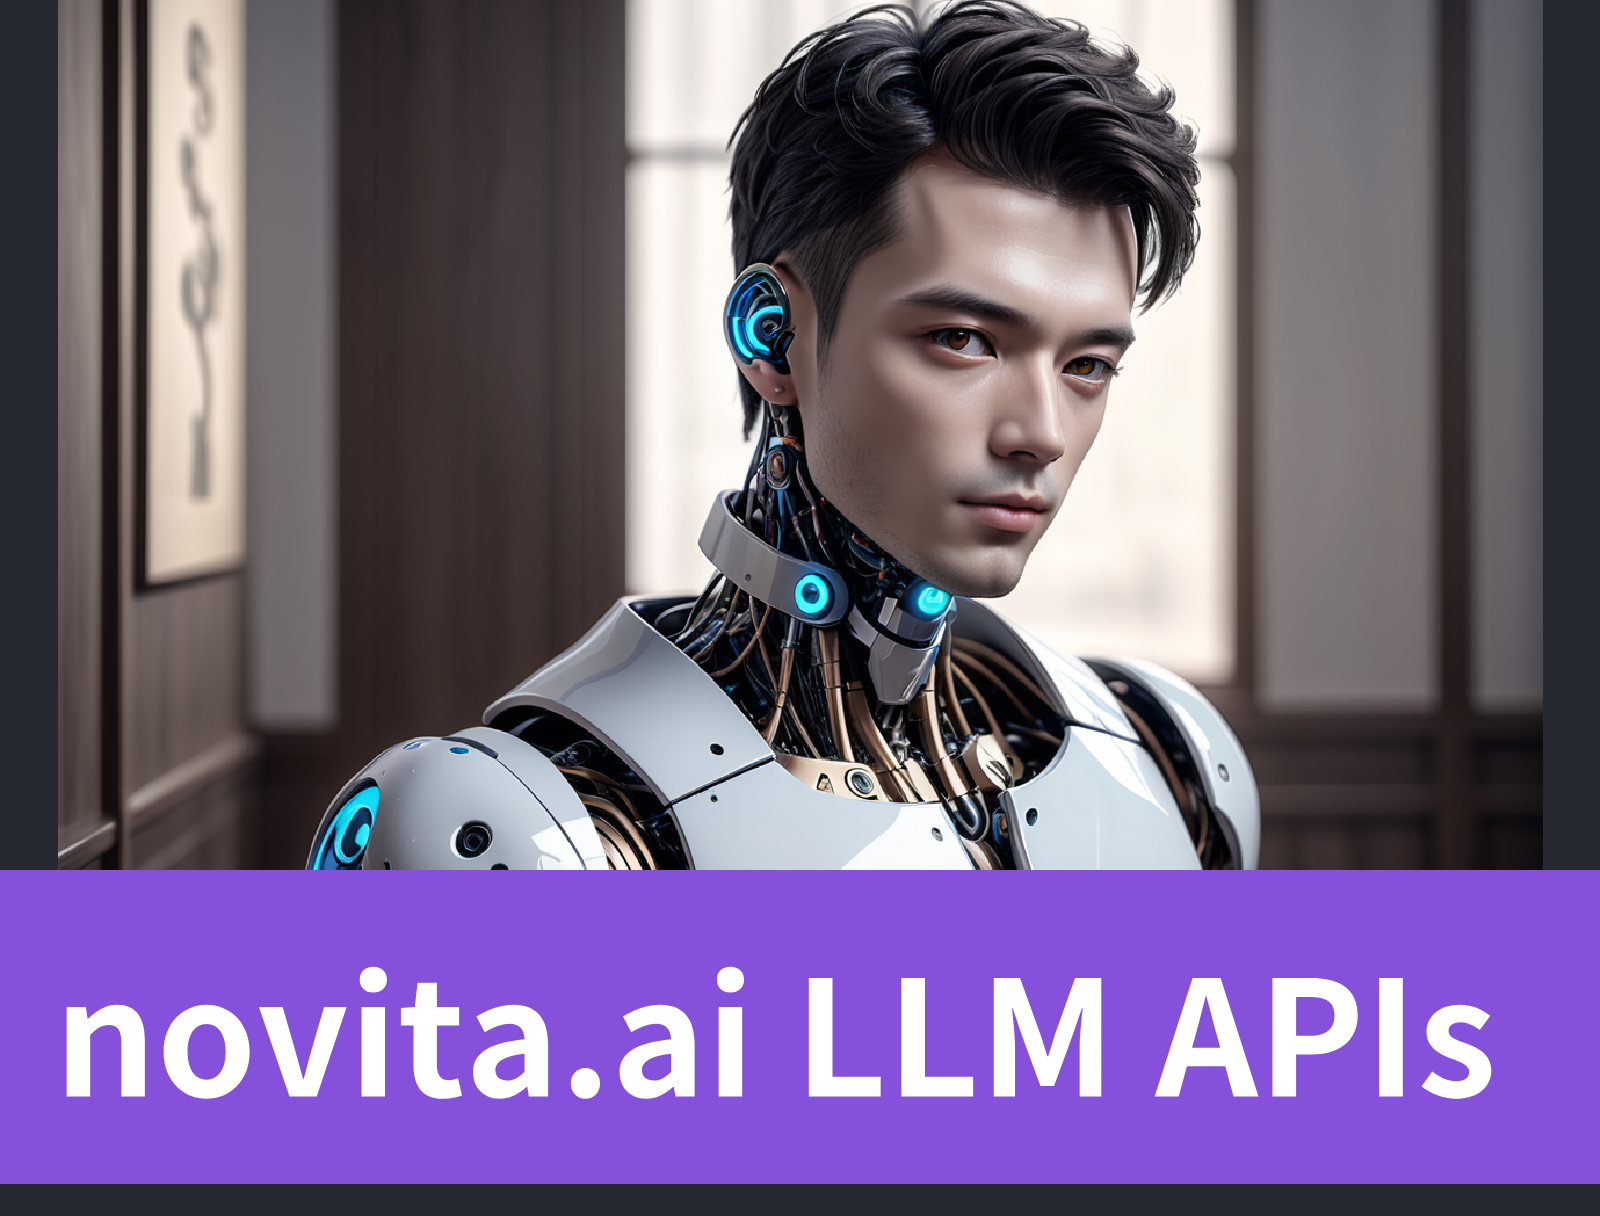 Releasing novita.ai LLM APIs: The Most Cost-effective Interface available